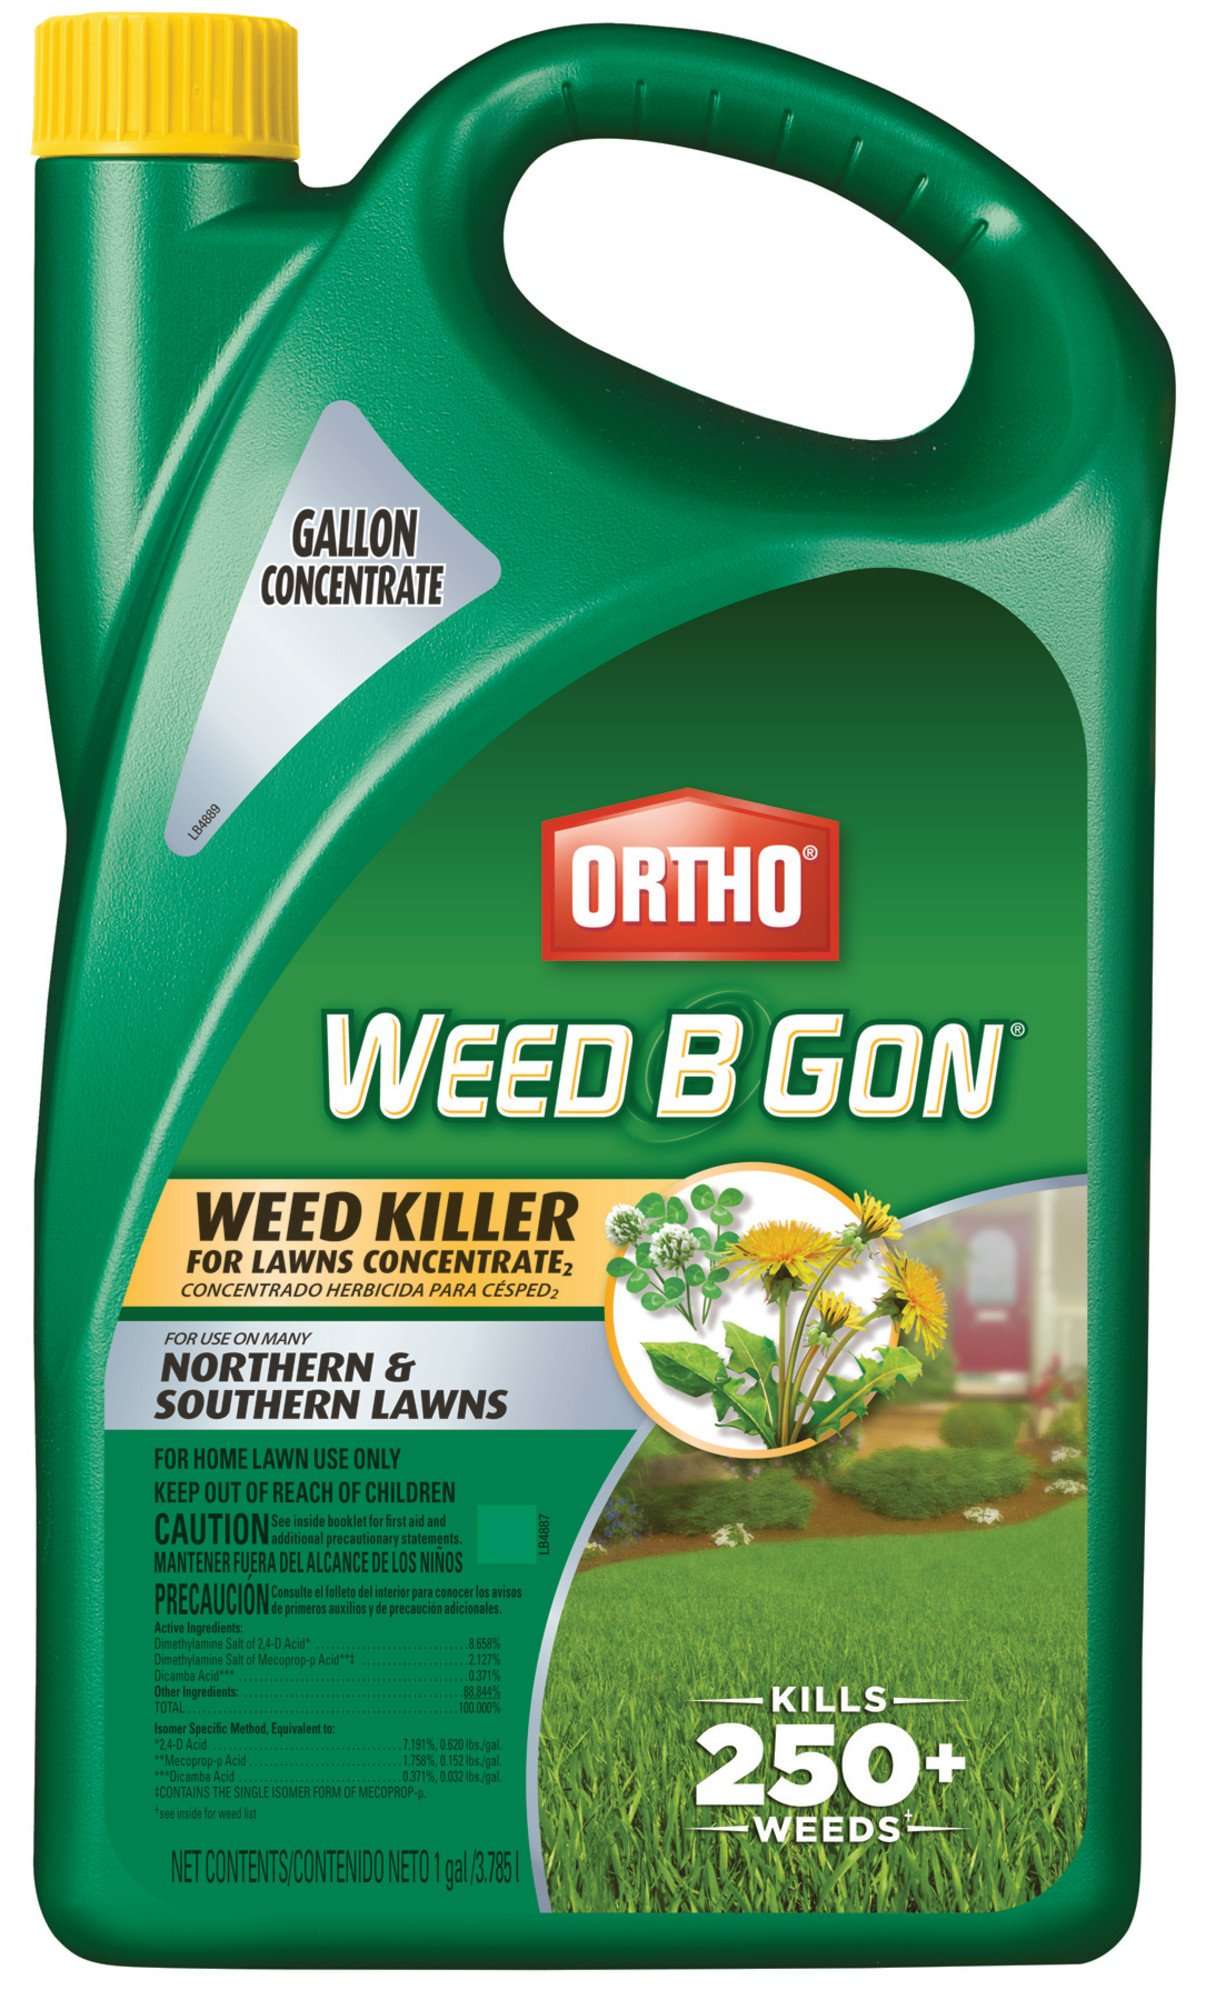 Ortho Weed B Gon Weed Killer for Lawns Concentrate2, 1 gal ...